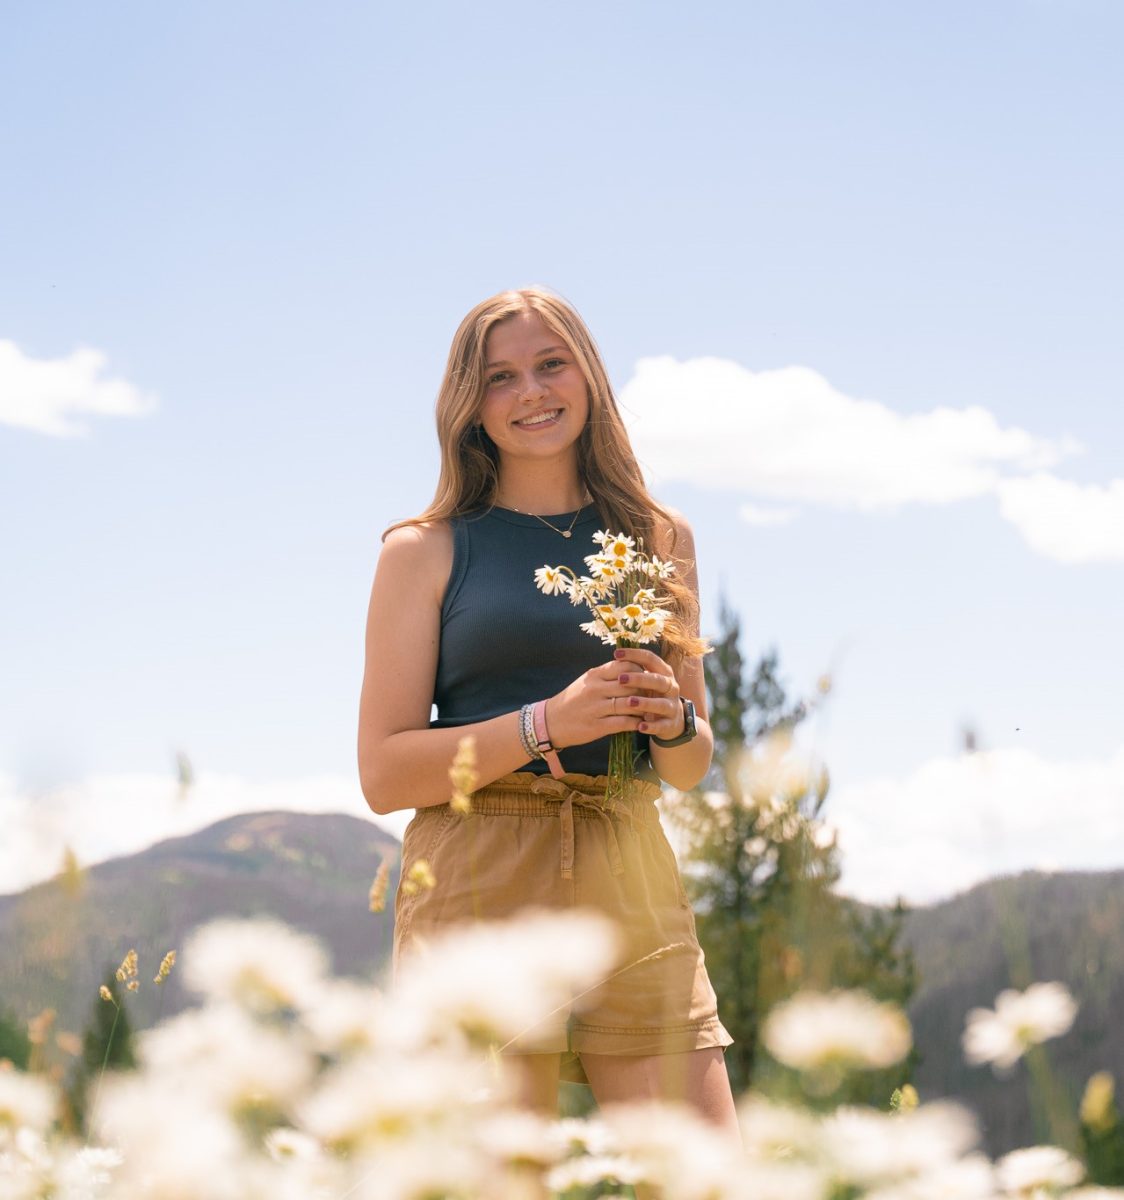 Photo of Mabry Mitchell in a Rocky Mountain daisy field. Photo by Emily Carr.